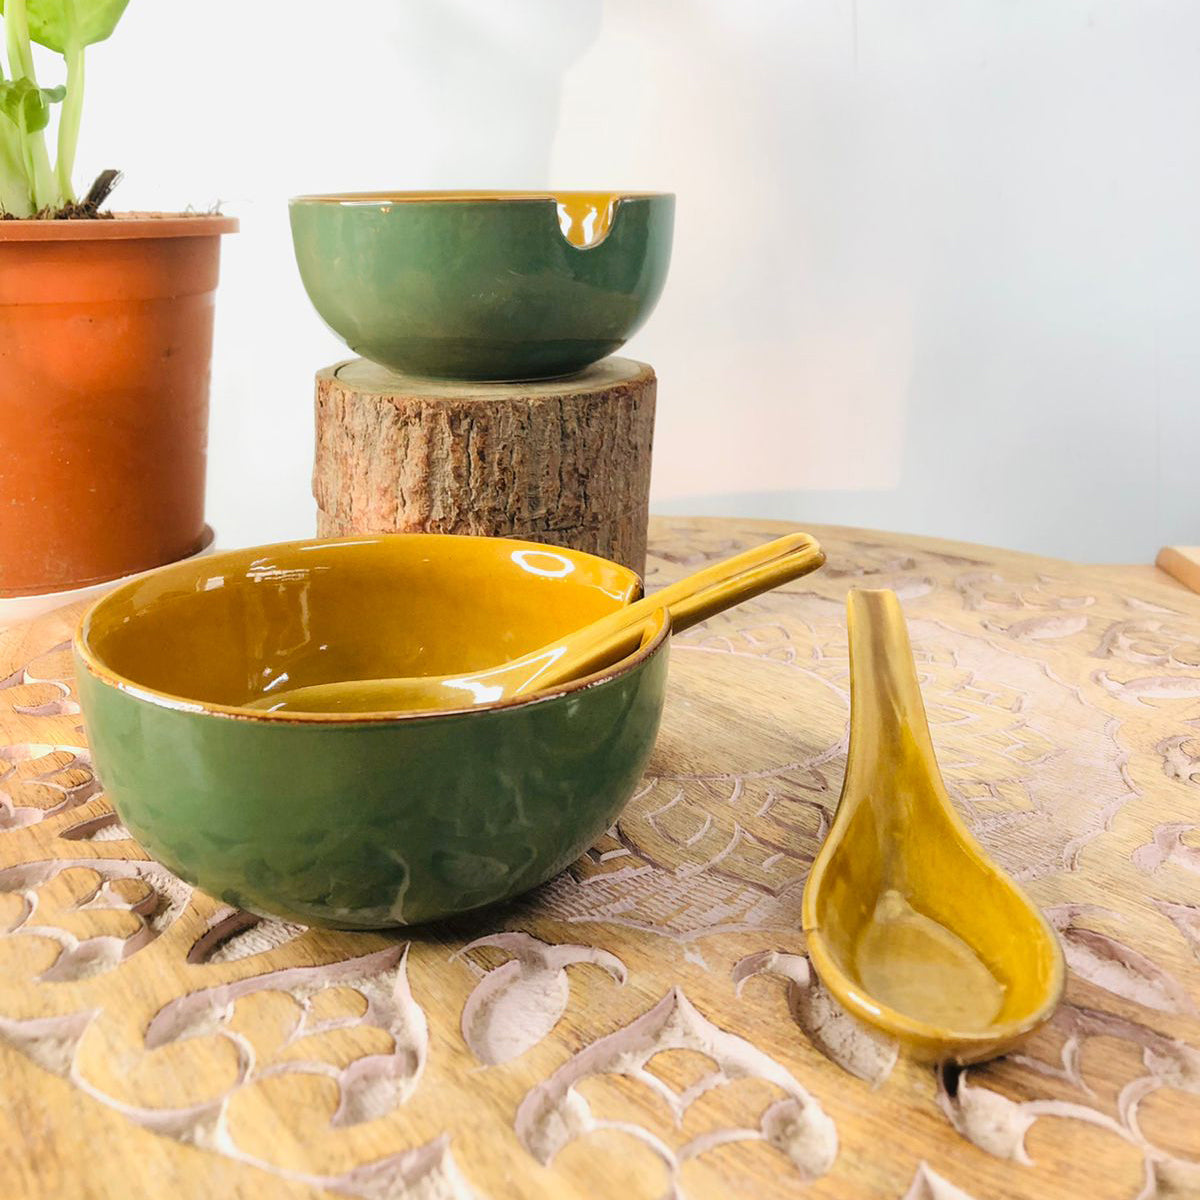 Handmade Ceramic Soup Bowl with Spoon (Set of 4)